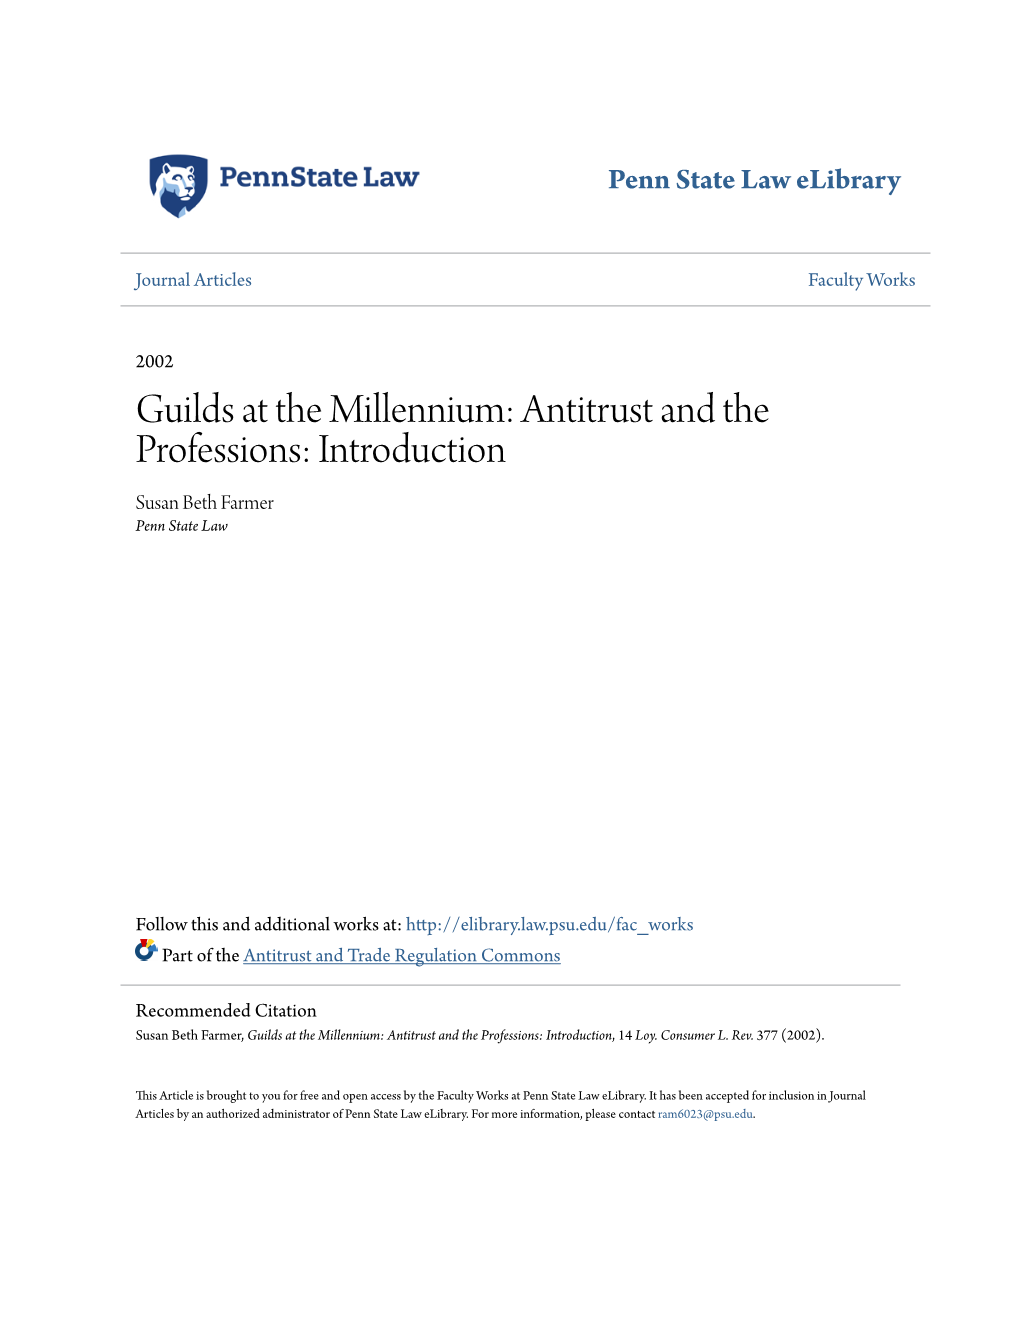 Guilds at the Millennium: Antitrust and the Professions: Introduction Susan Beth Farmer Penn State Law